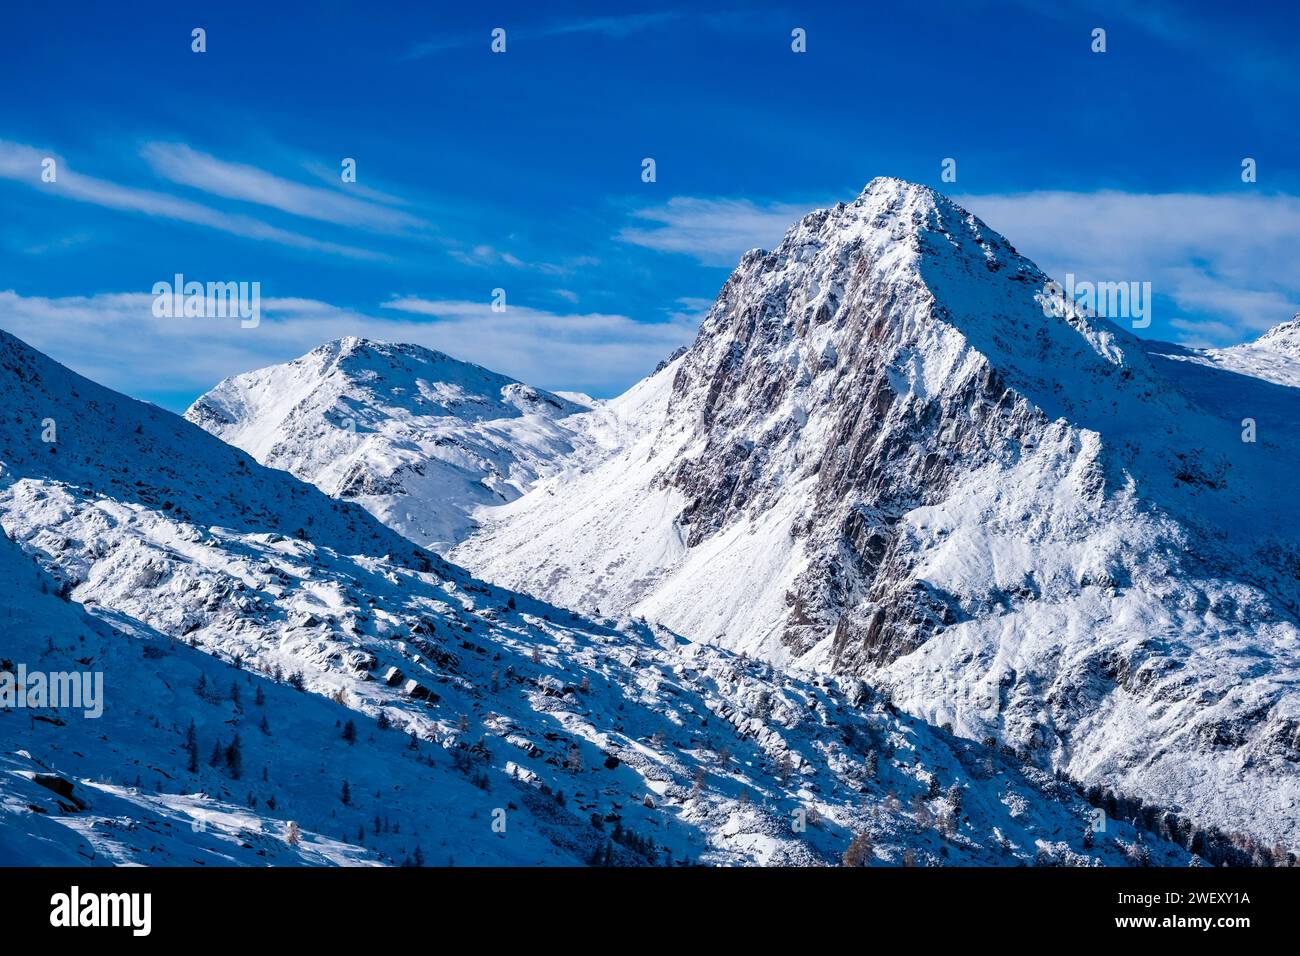 The snow-covered summits of Cima Val Cigolera and Colbricon Ovest, seen from the summit of Tognazza in winter. Stock Photo